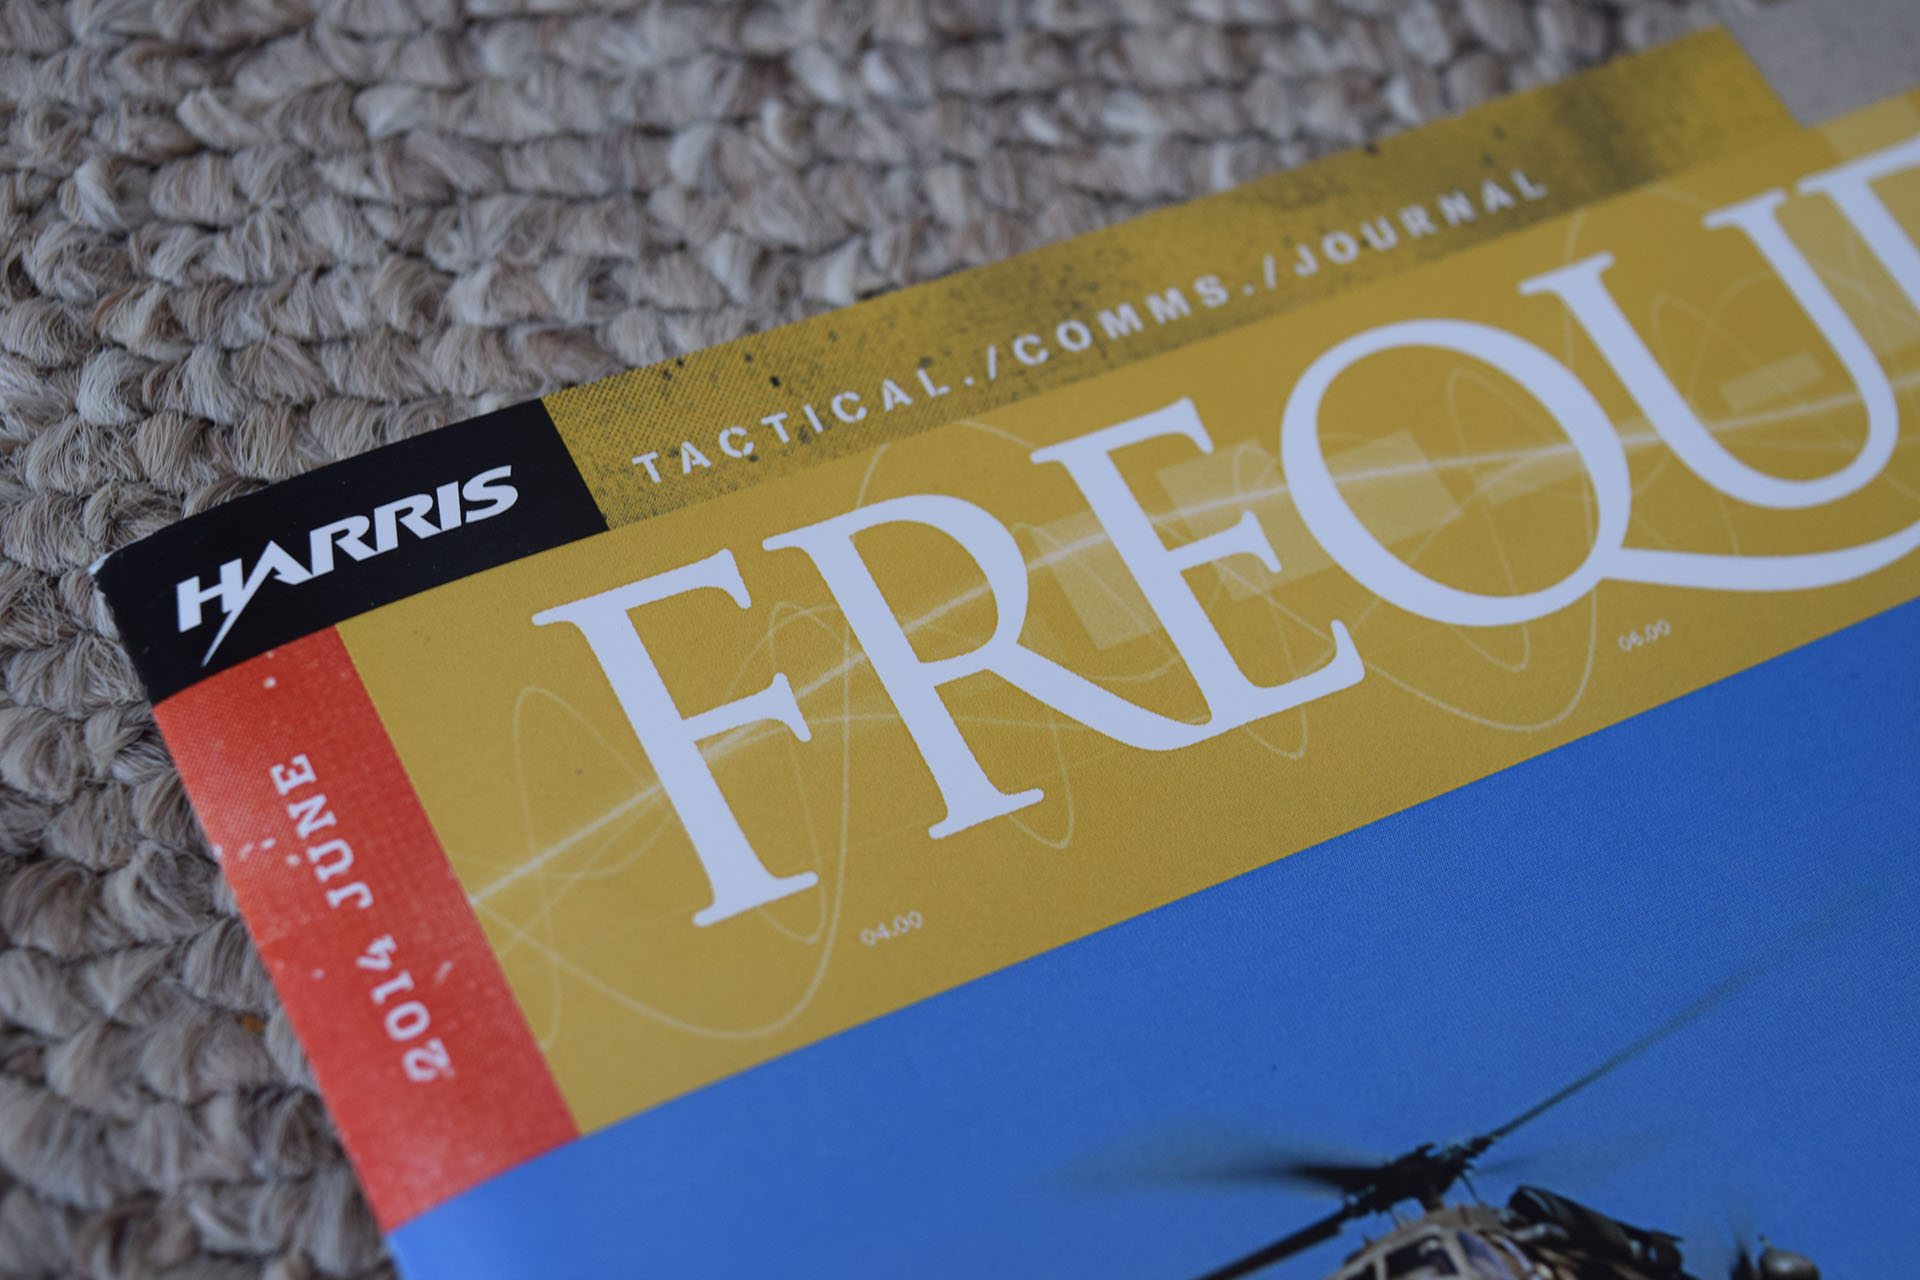 frequency-photo-cover-detail_0365